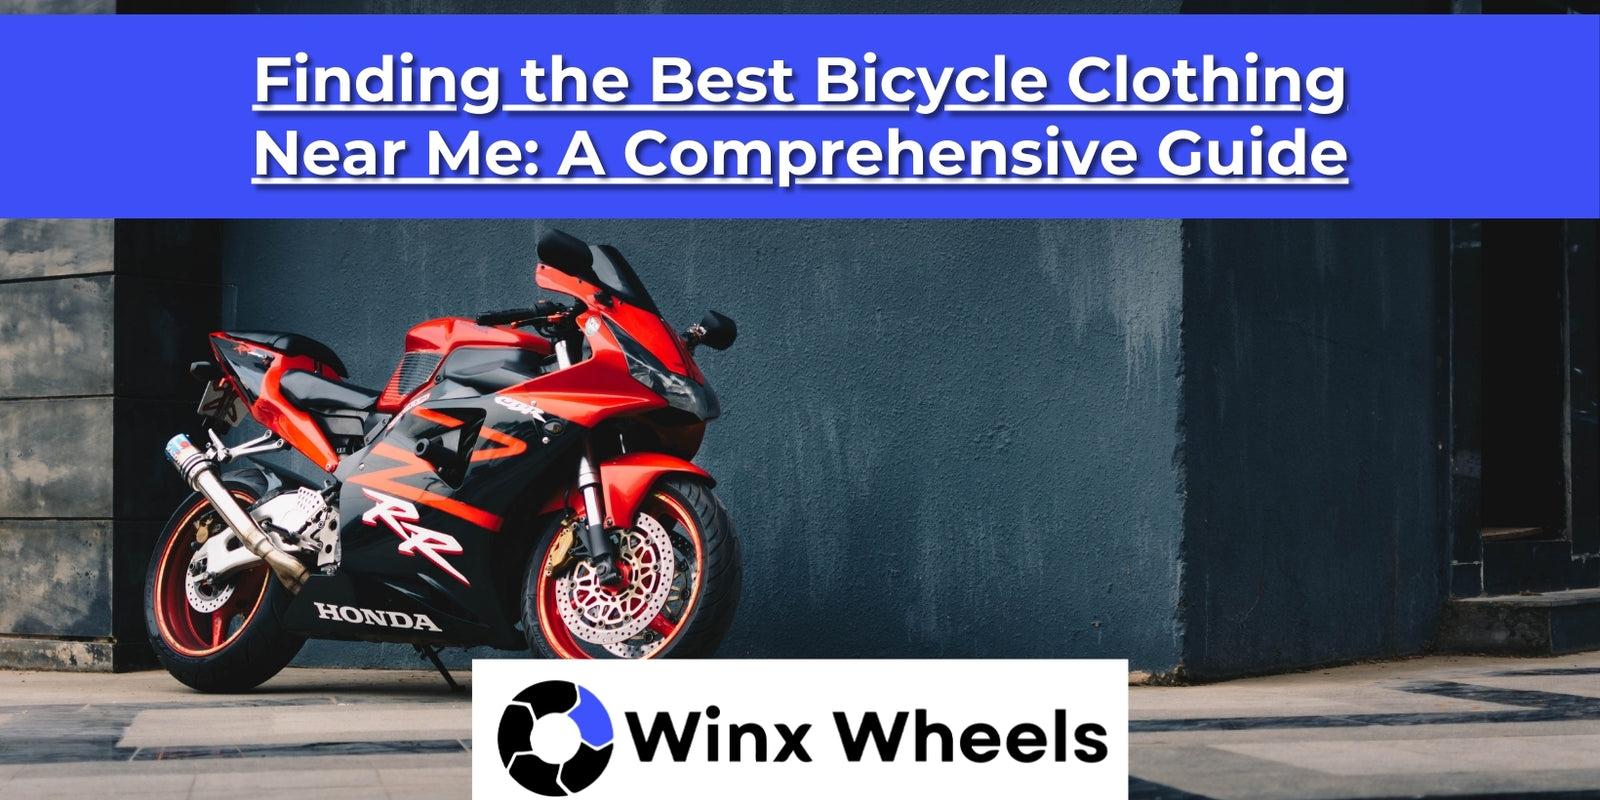 Finding the Best Bicycle Clothing Near Me: A Comprehensive Guide